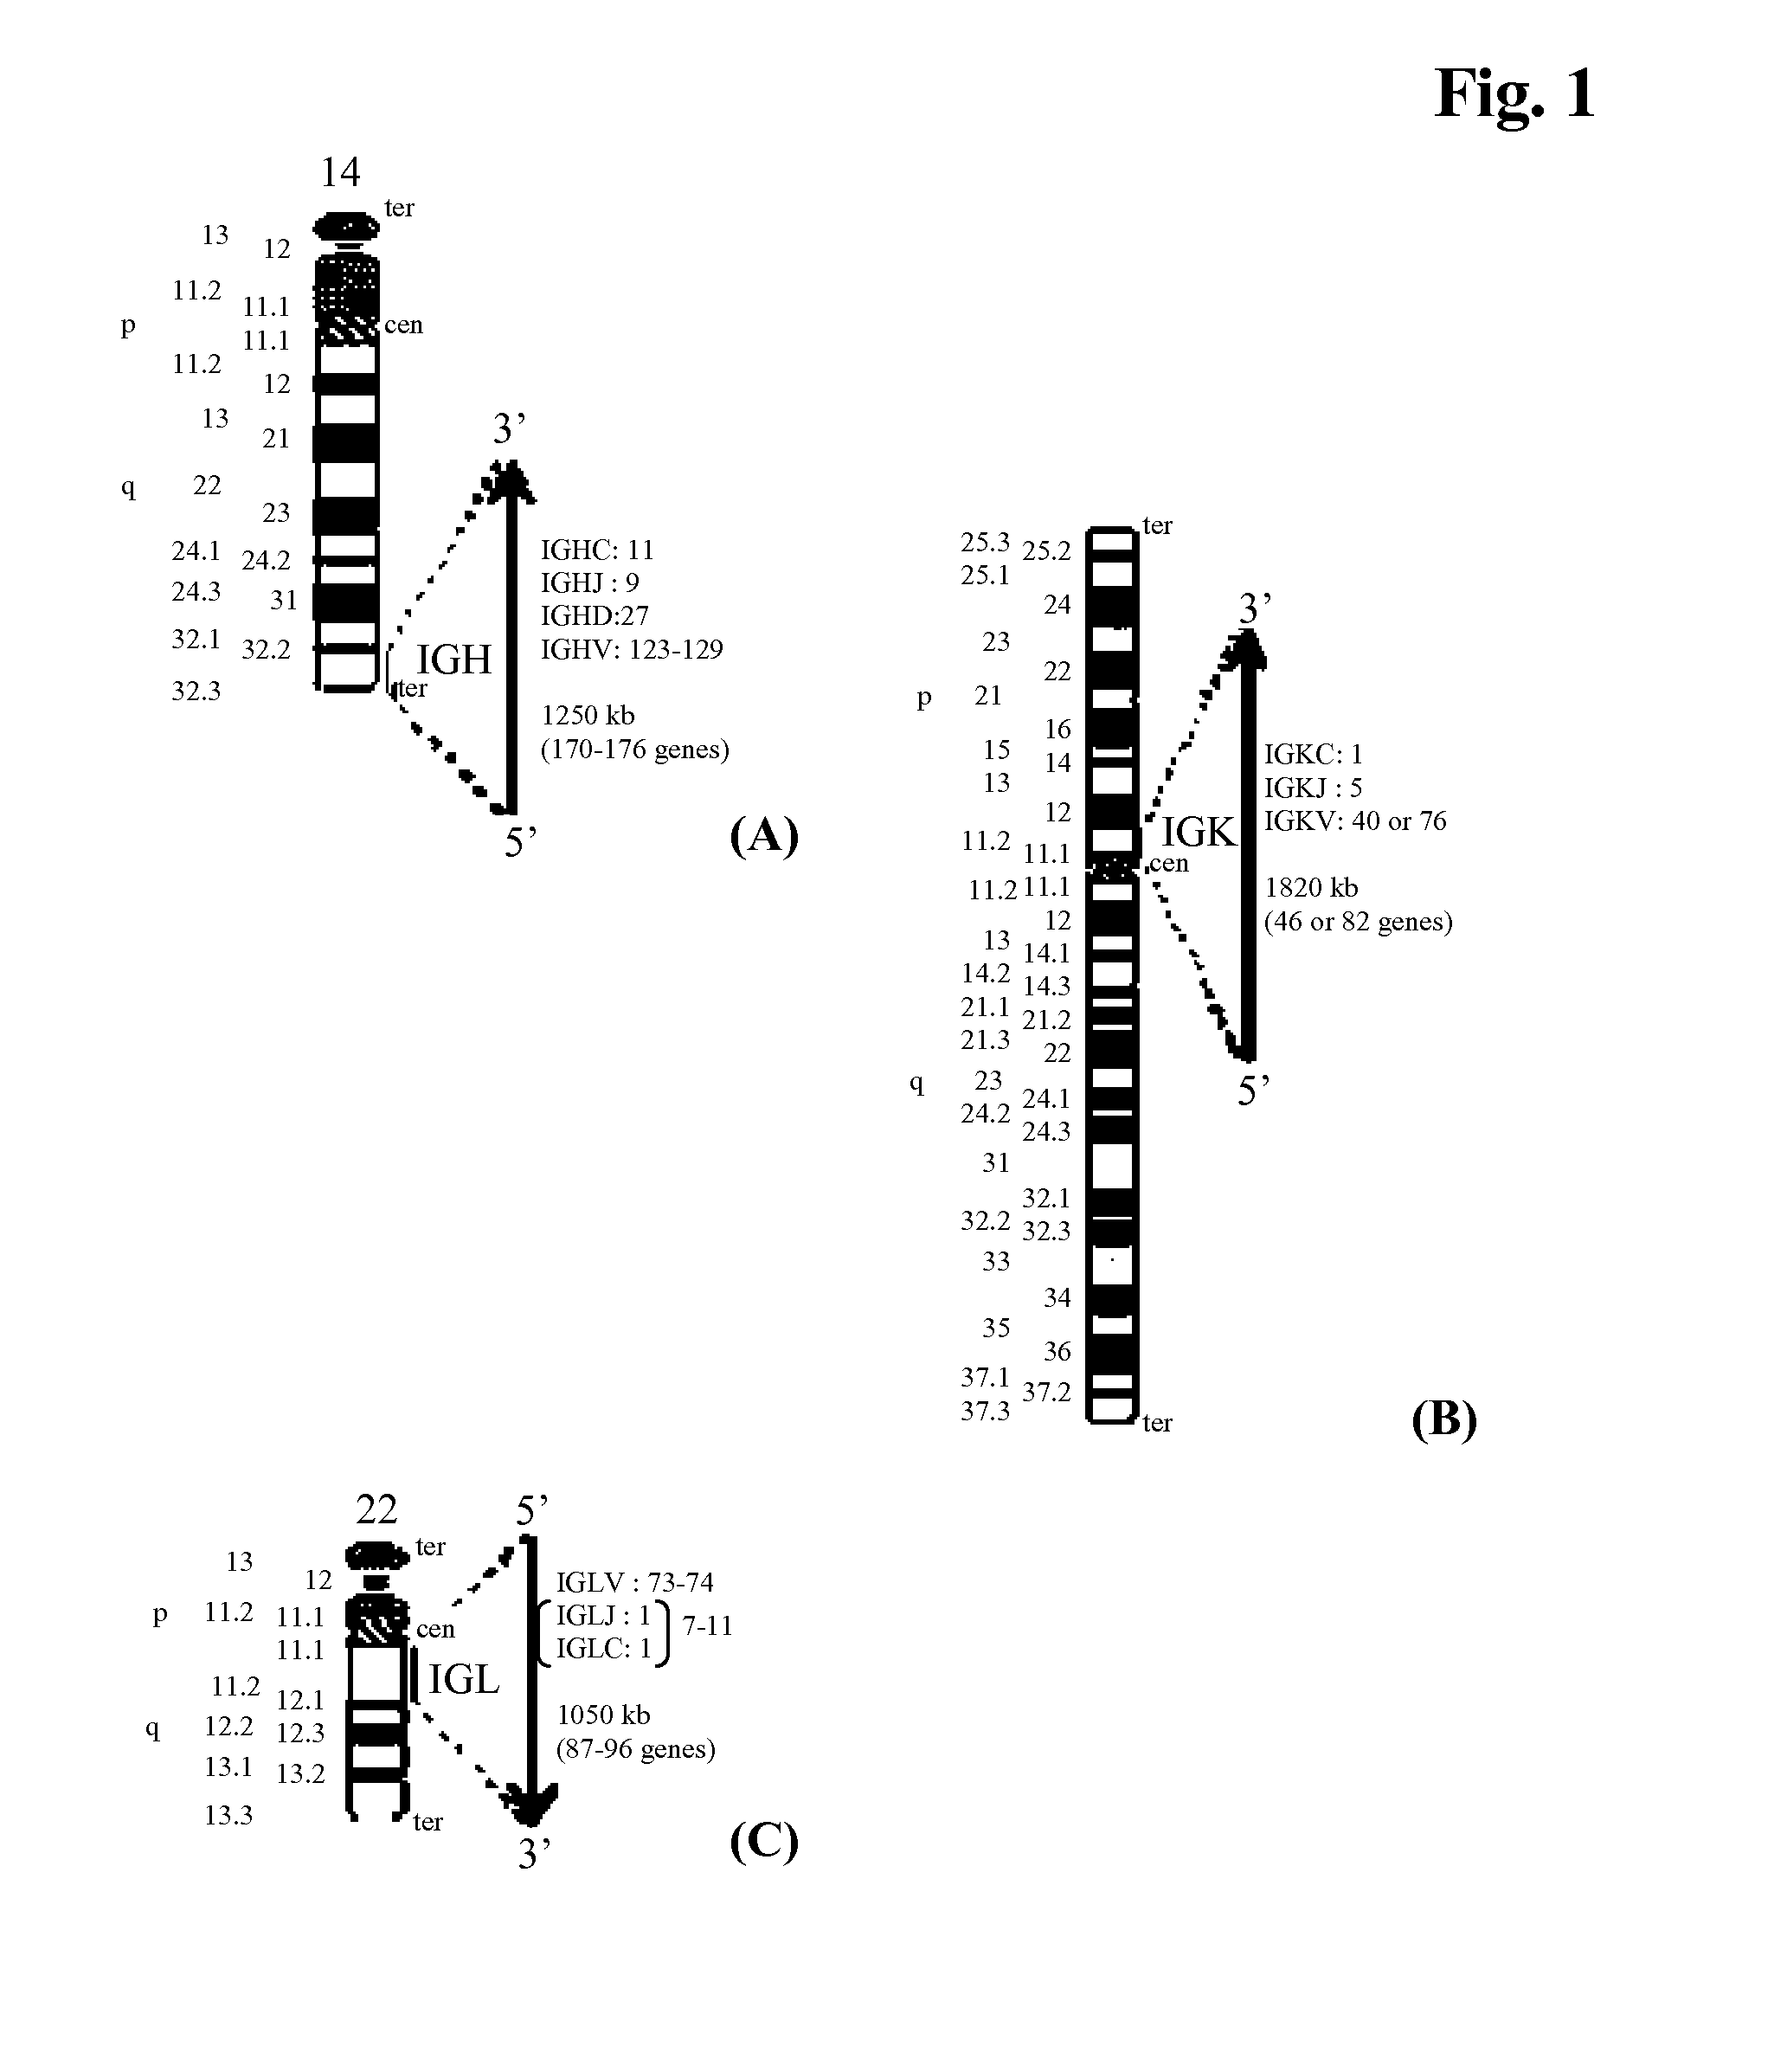 METHOD FOR OBTAINING FAB FRAGMENTS FROM SINGLE ANTIBODY PRODUCING CELLS BY MULTIPLEXED CPR IN COMBINATION WITH TaqMan PROBES